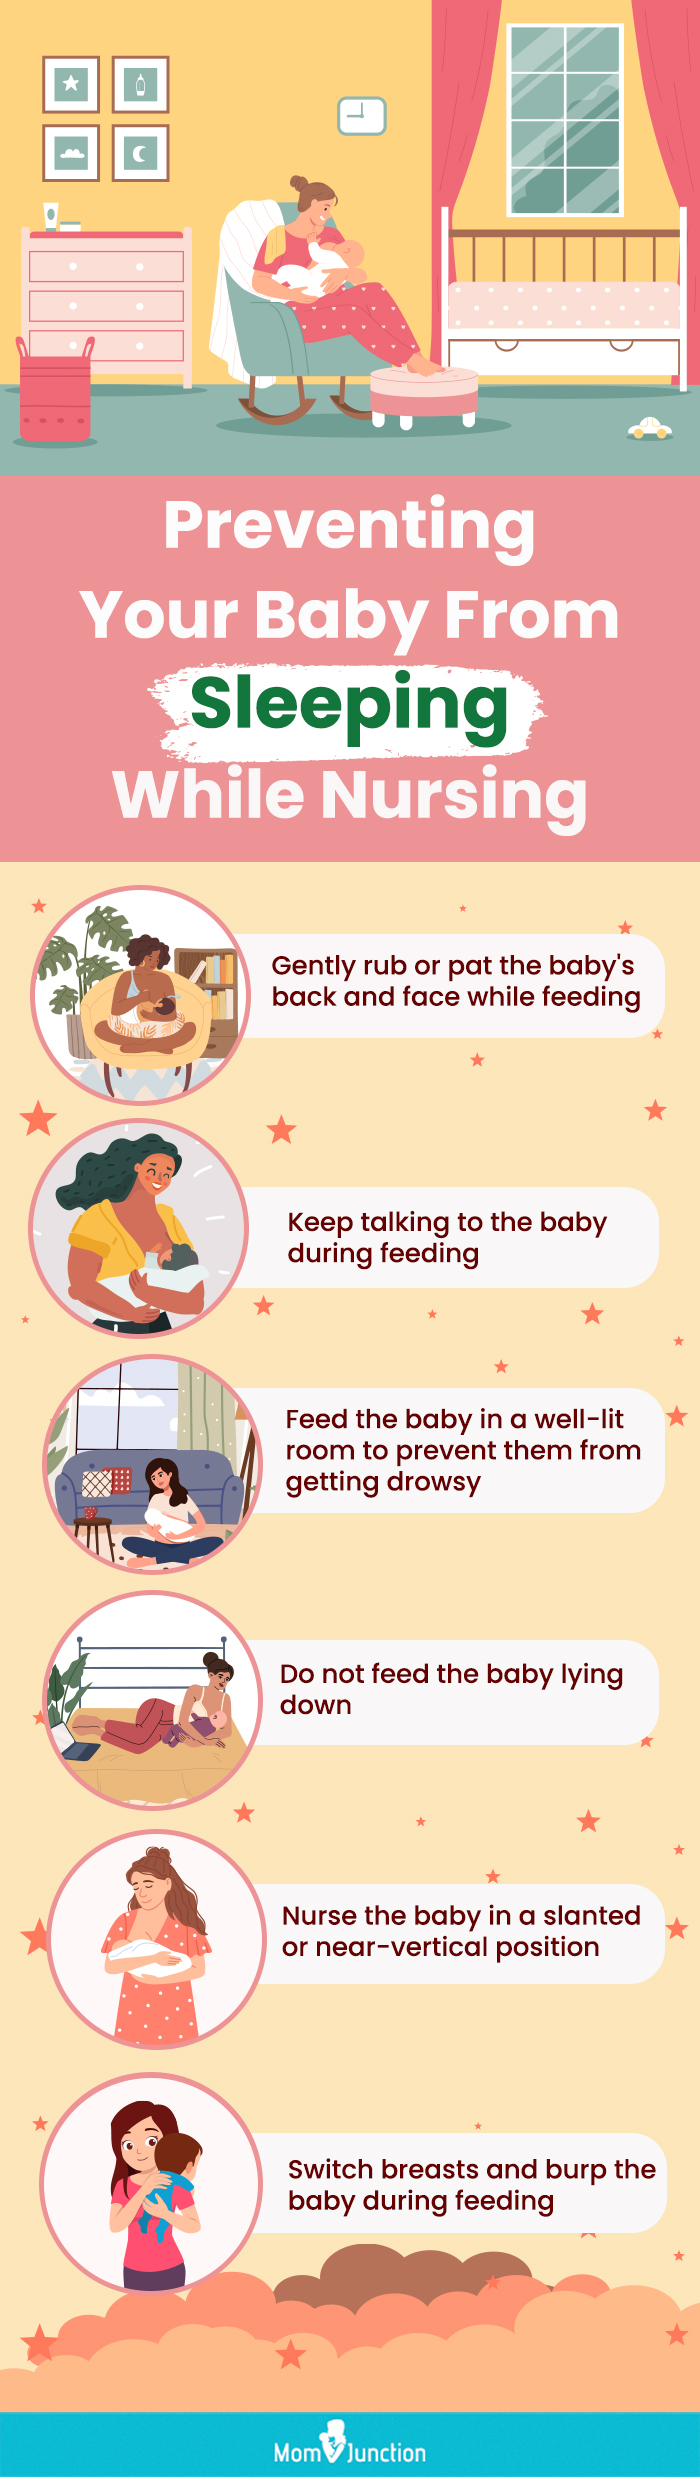 preventing your baby from sleeping while nursing (infographic)